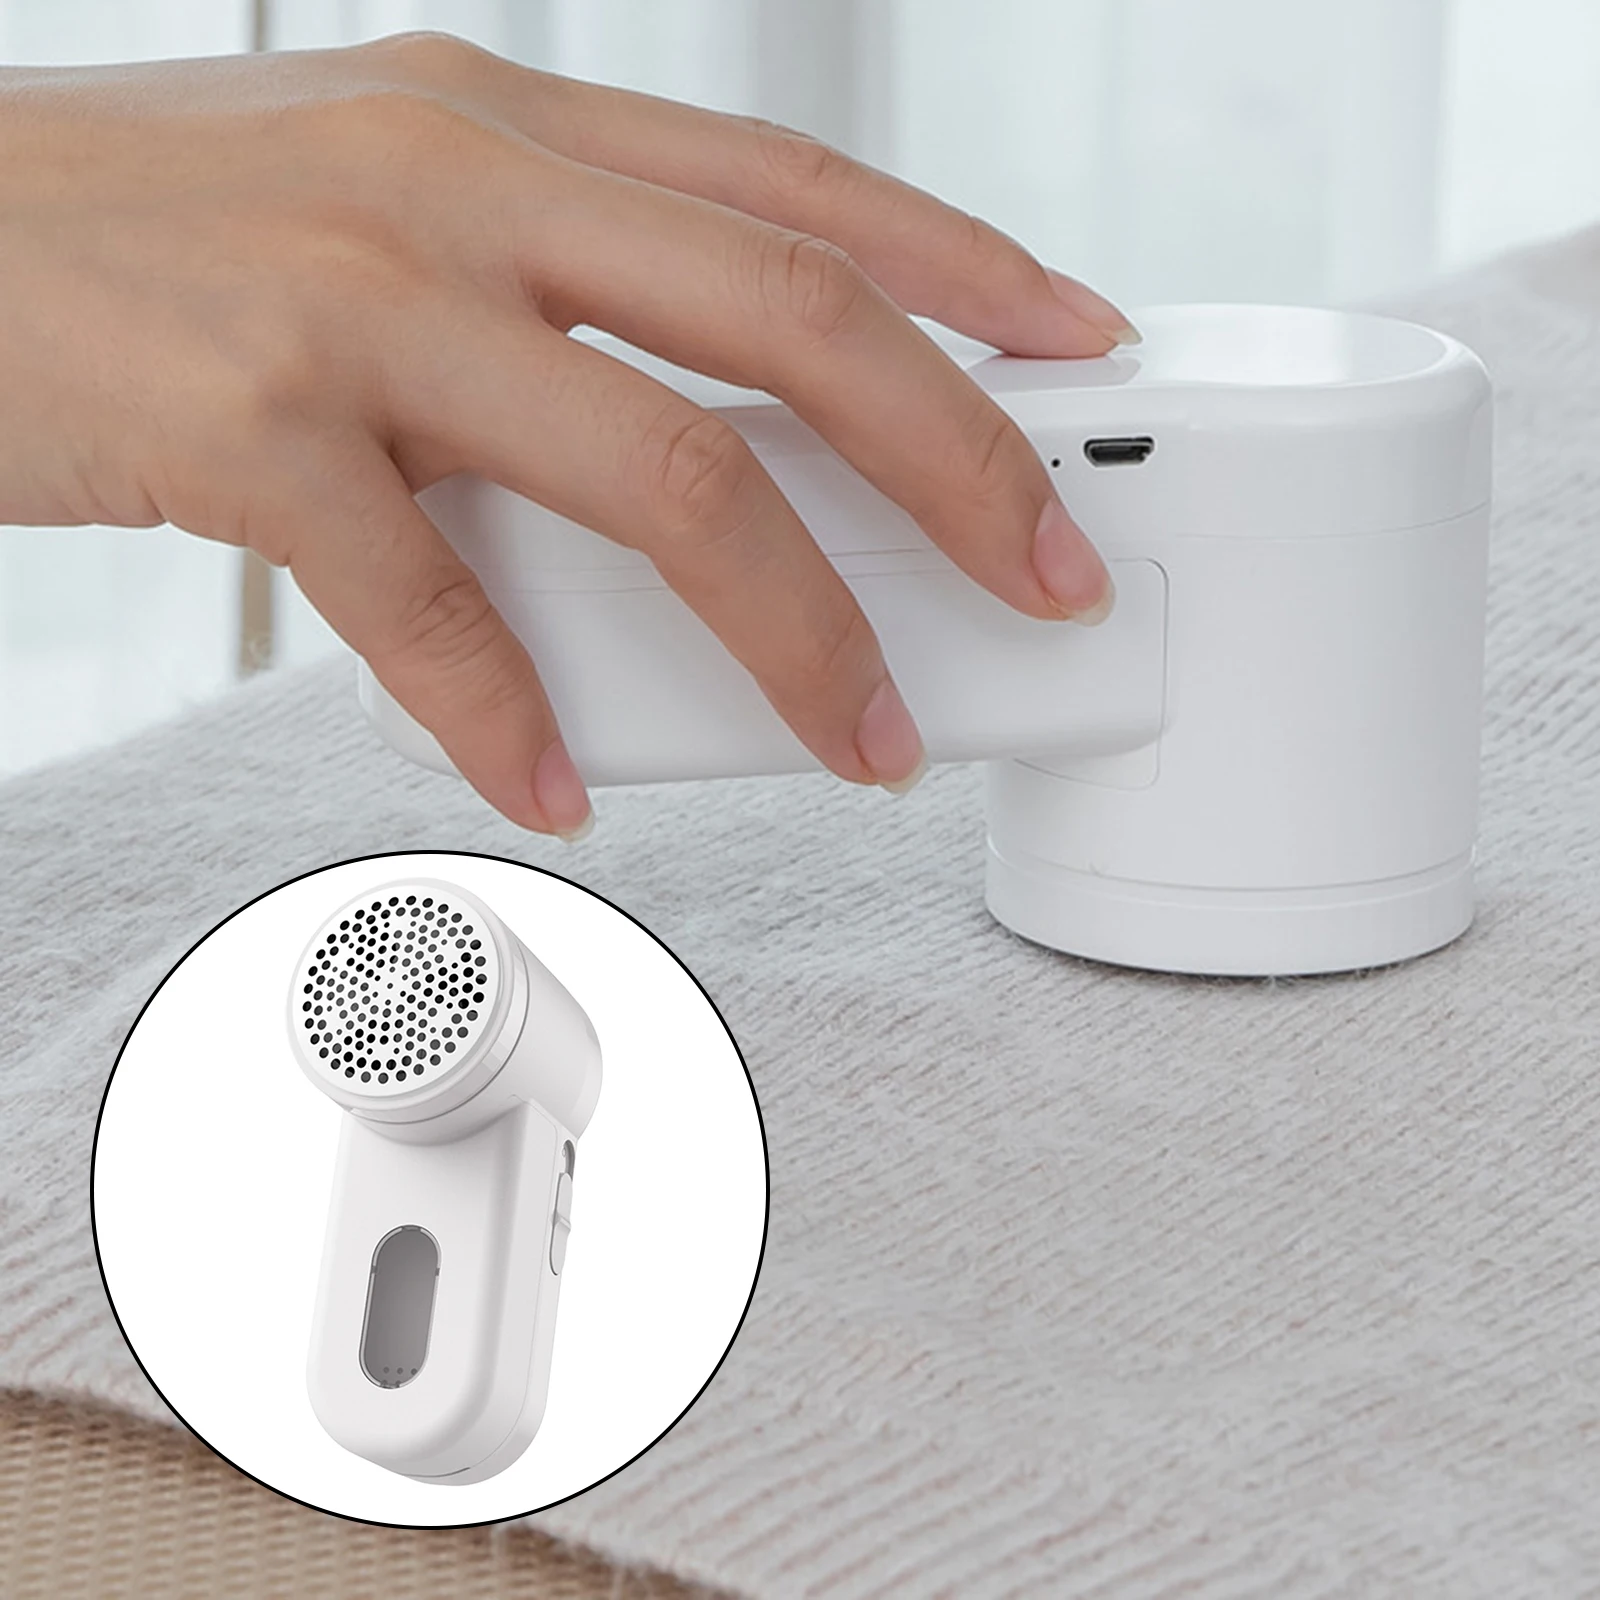 USB Rechargeable Lint Remover Clothes Shaver Clothes Sweater Sofa Curtain Socks Legging Lint Balls Pill Fluff Trimmer Cleaner